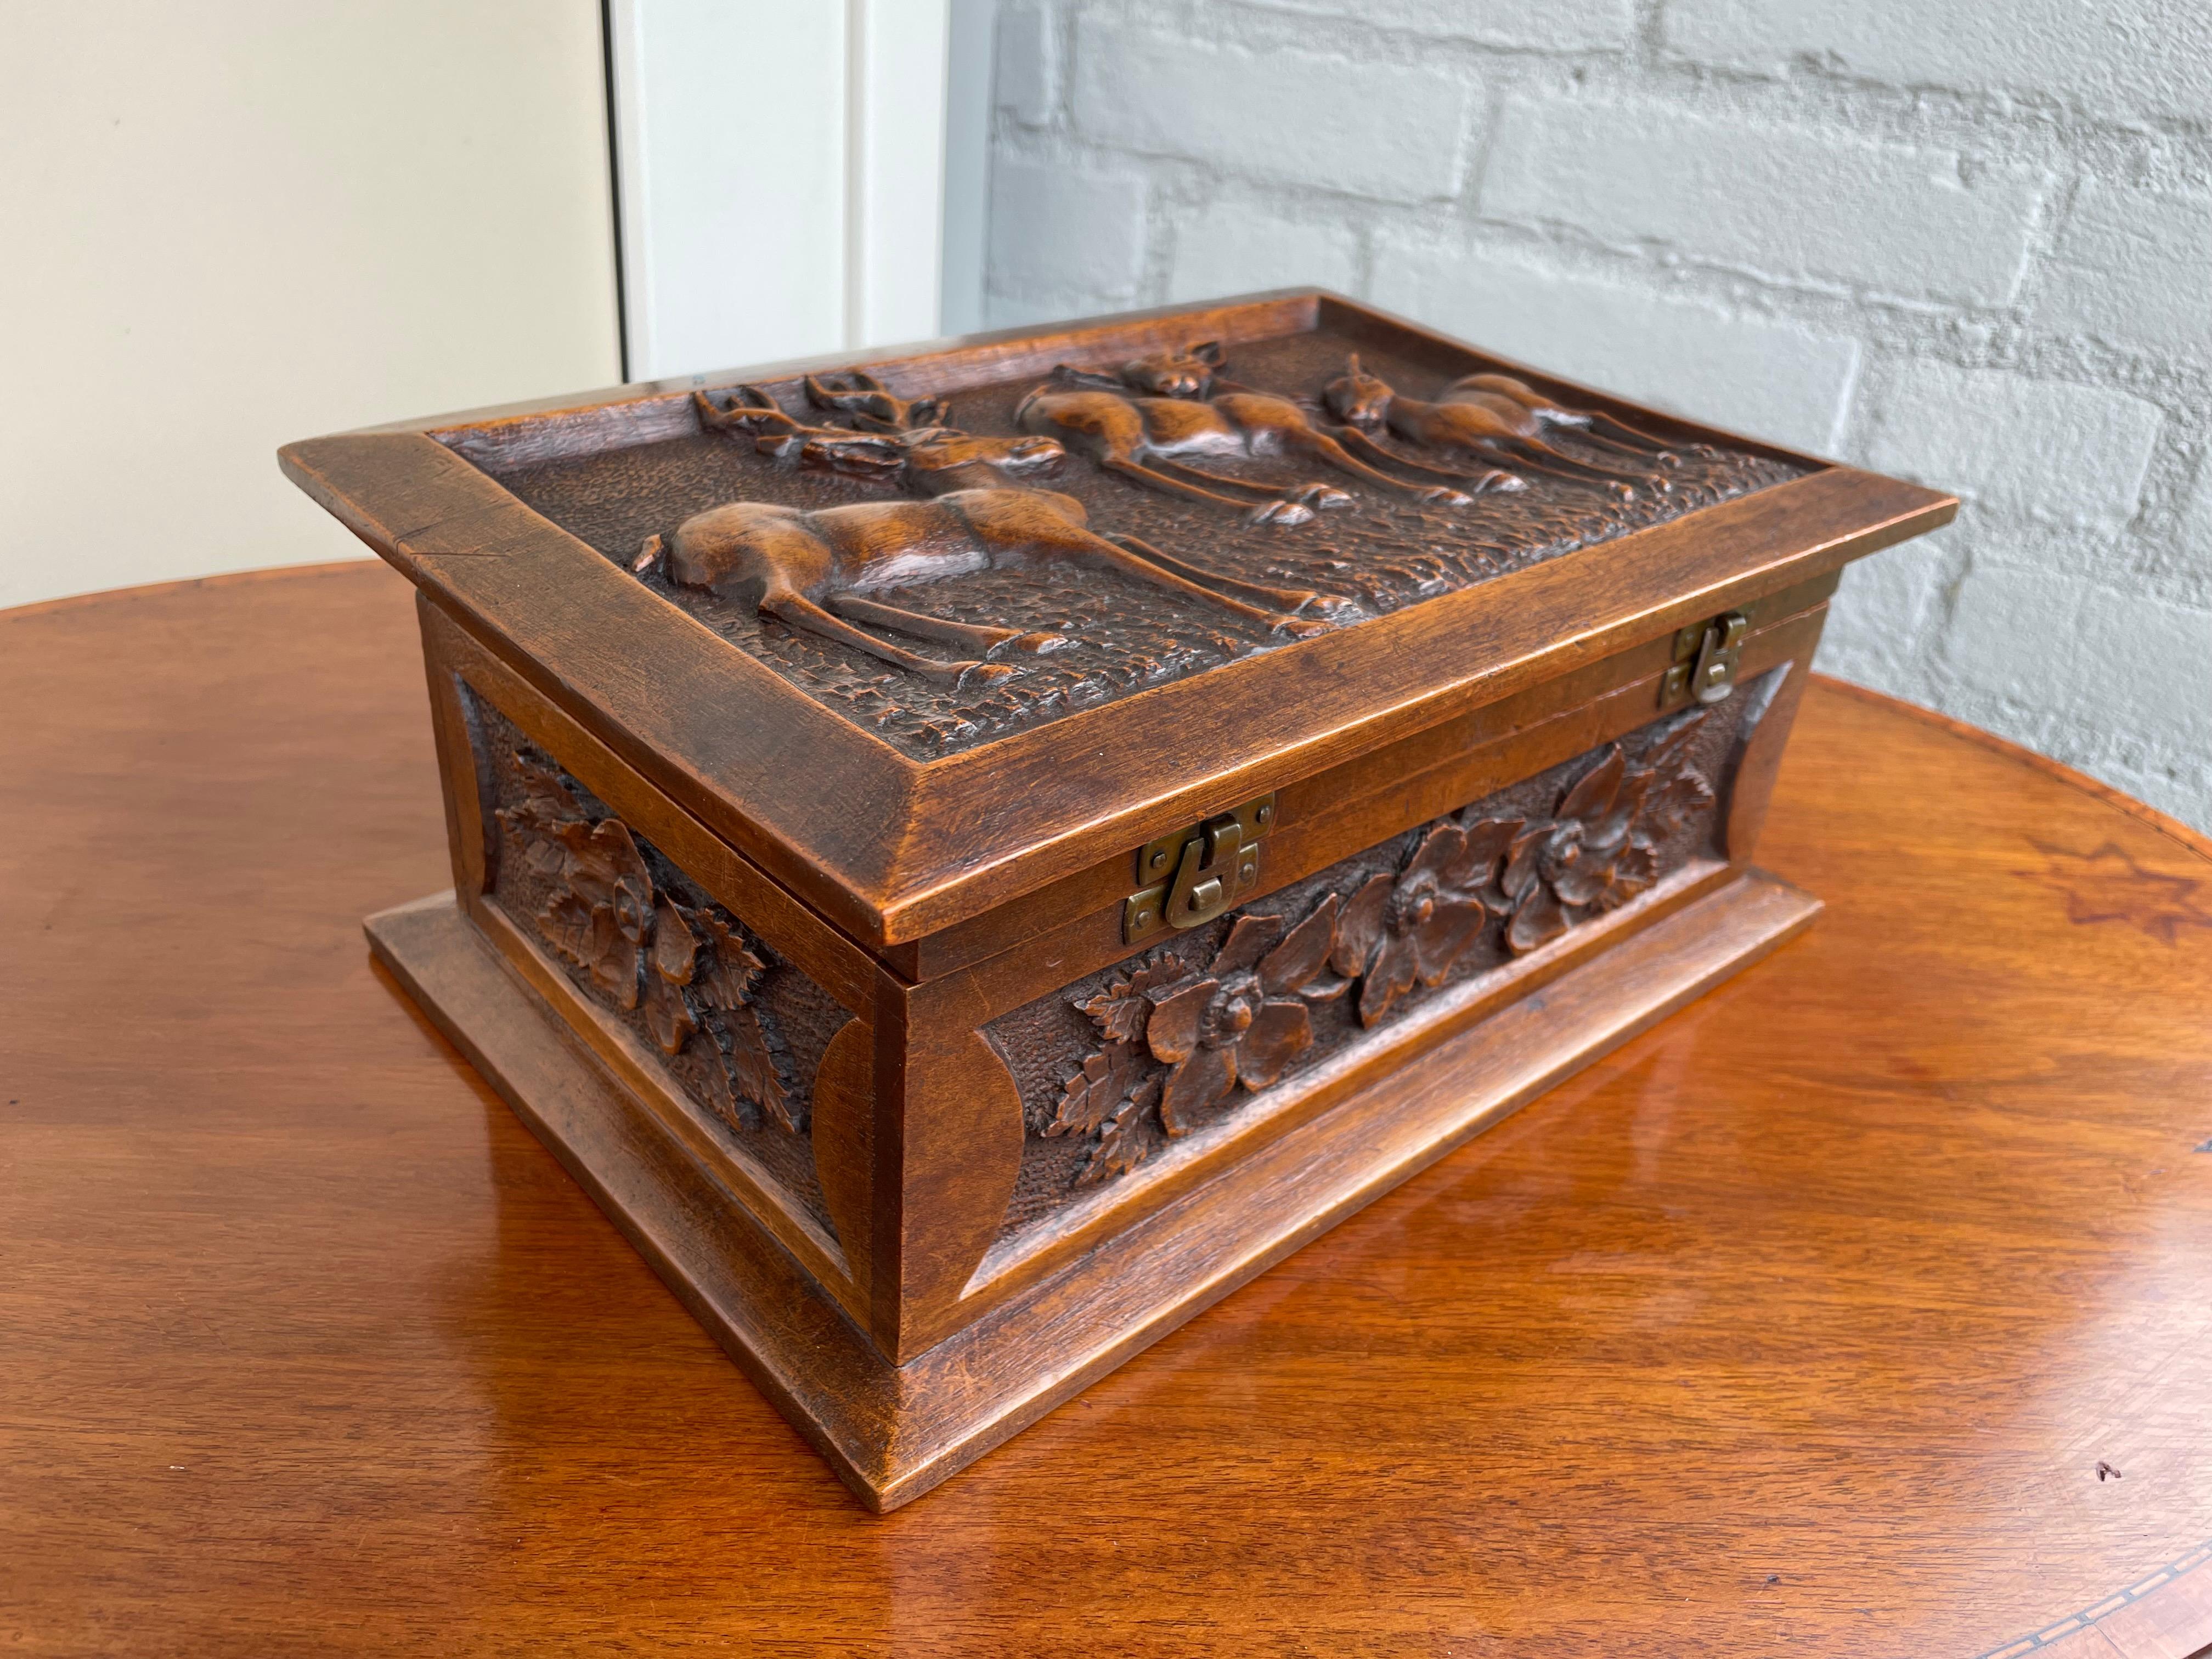 Stunning Arts & Crafts Box with Hand Carved Deer Sculptures in Deep Relief, 1910 7